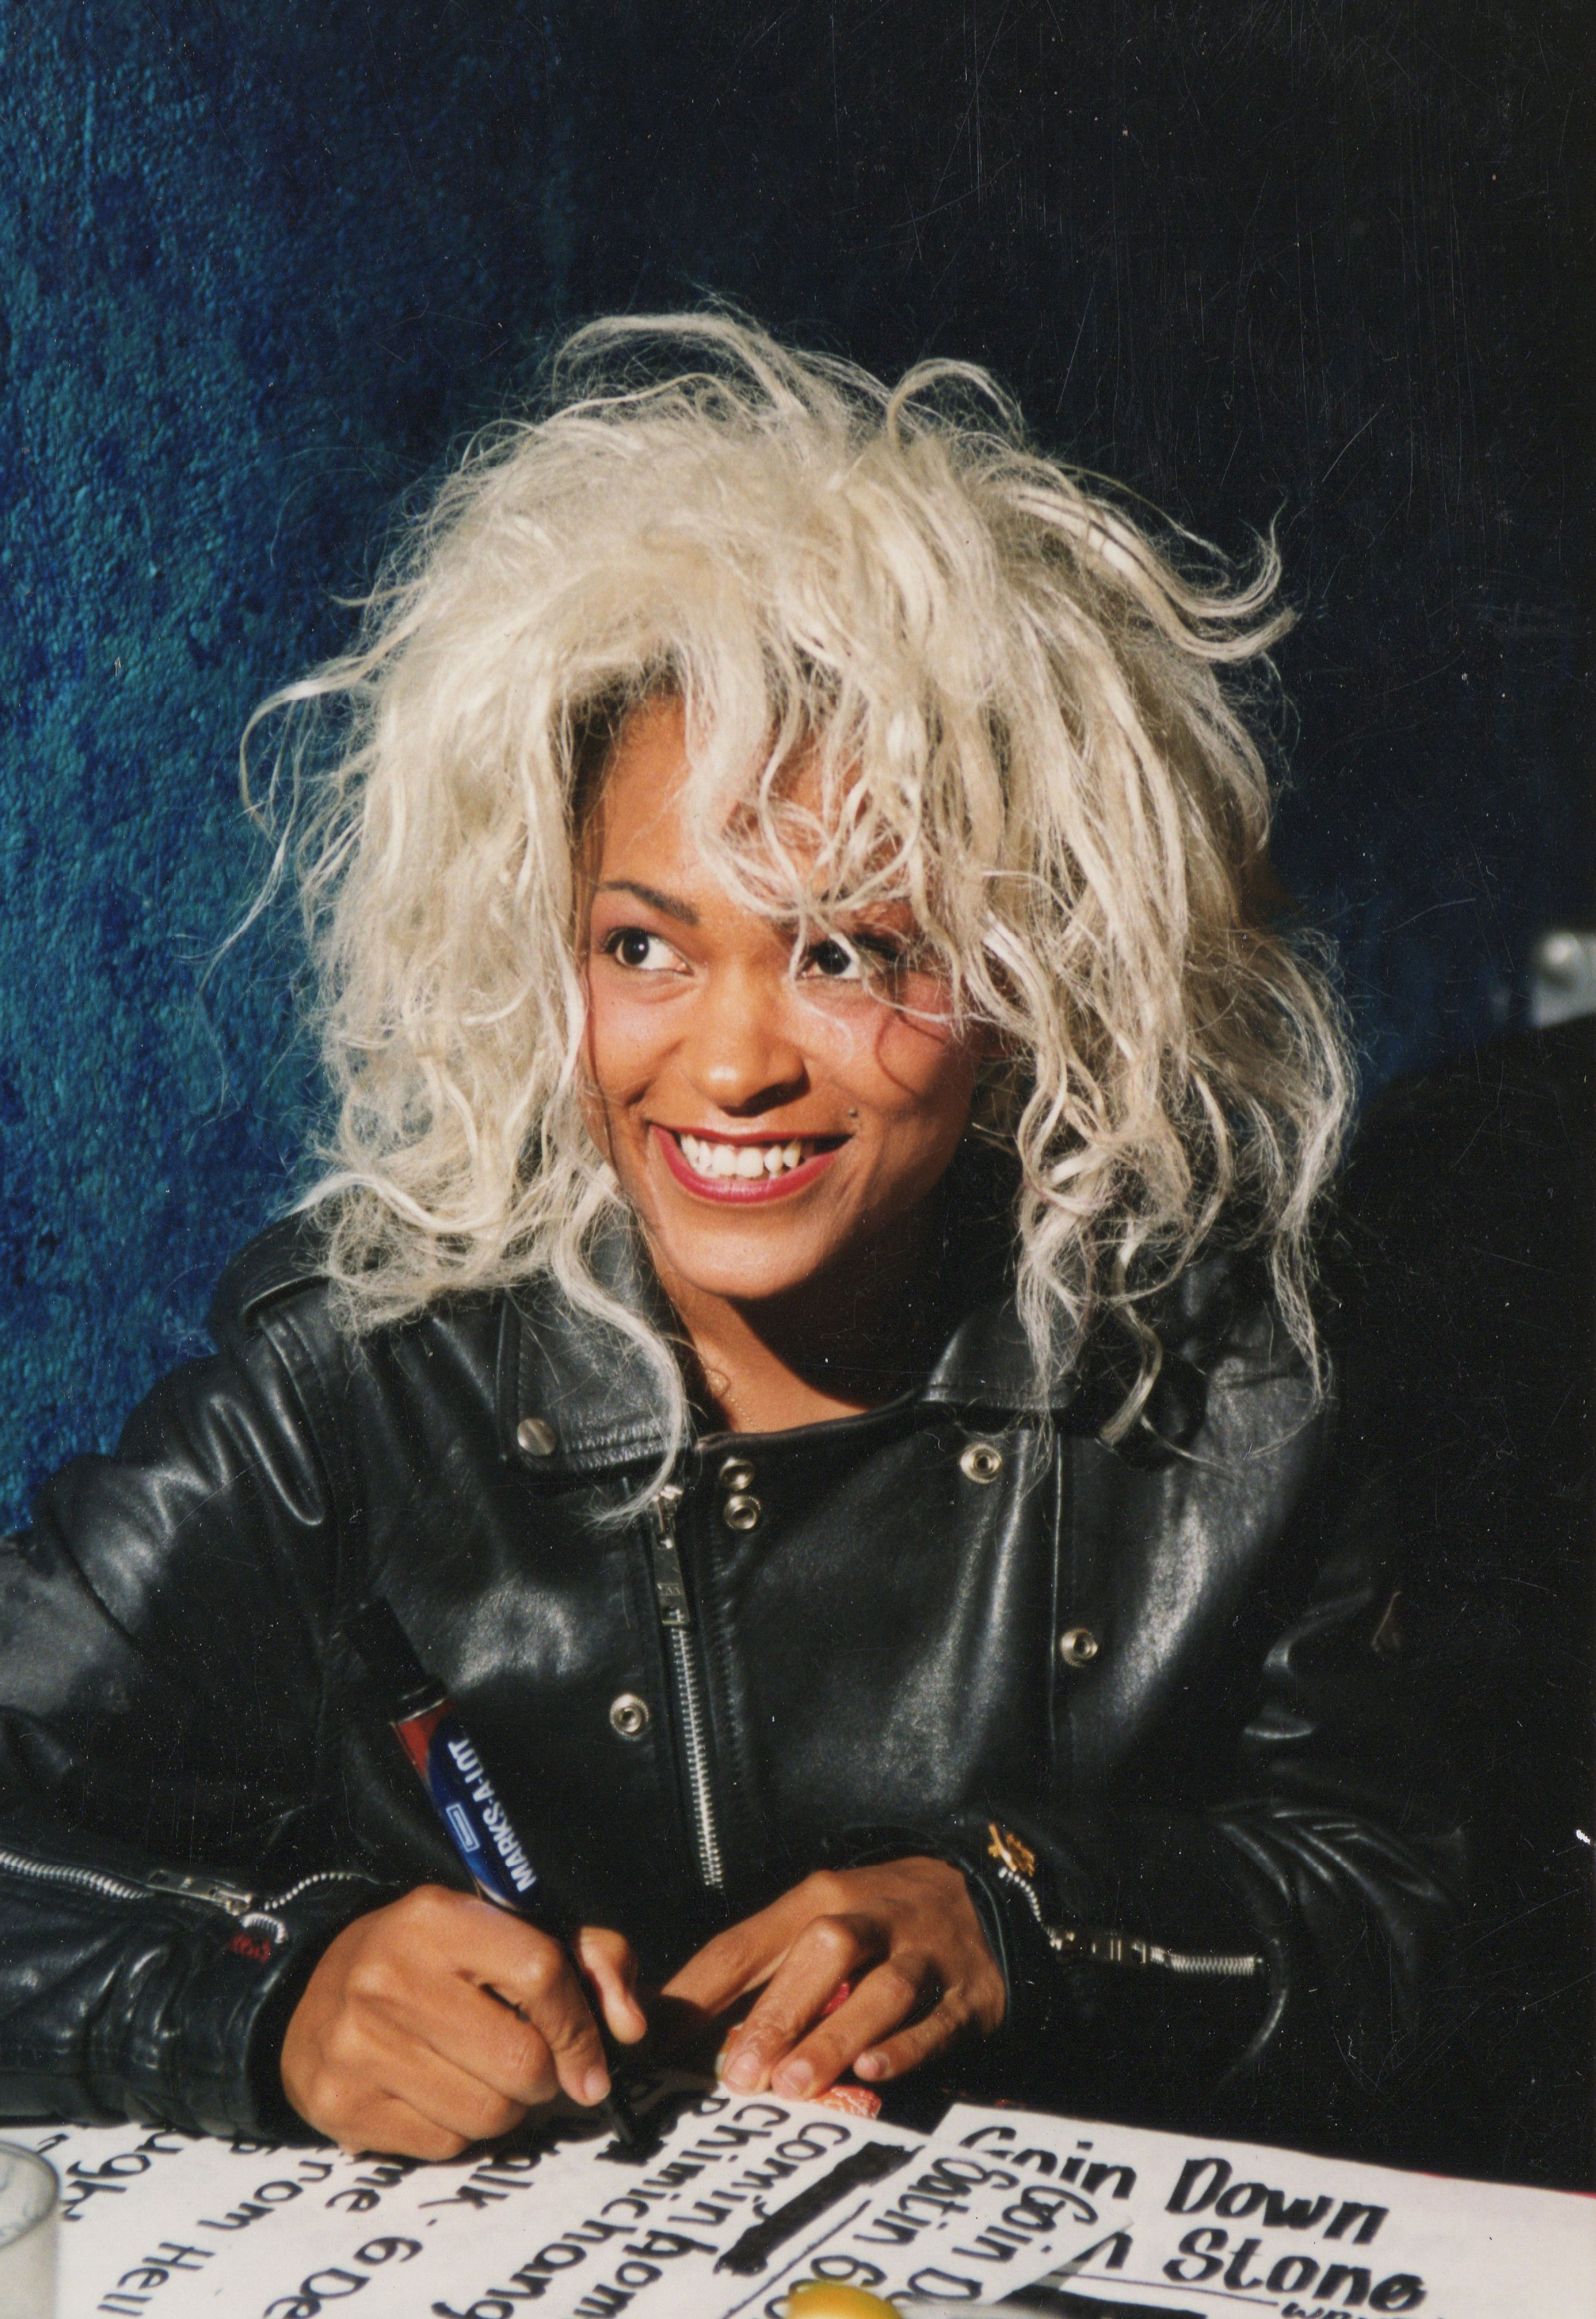 Person wearing black leather jacket smiles, their hair is platinum blonde. They are signing something on the table in front of them with a thick black marker.